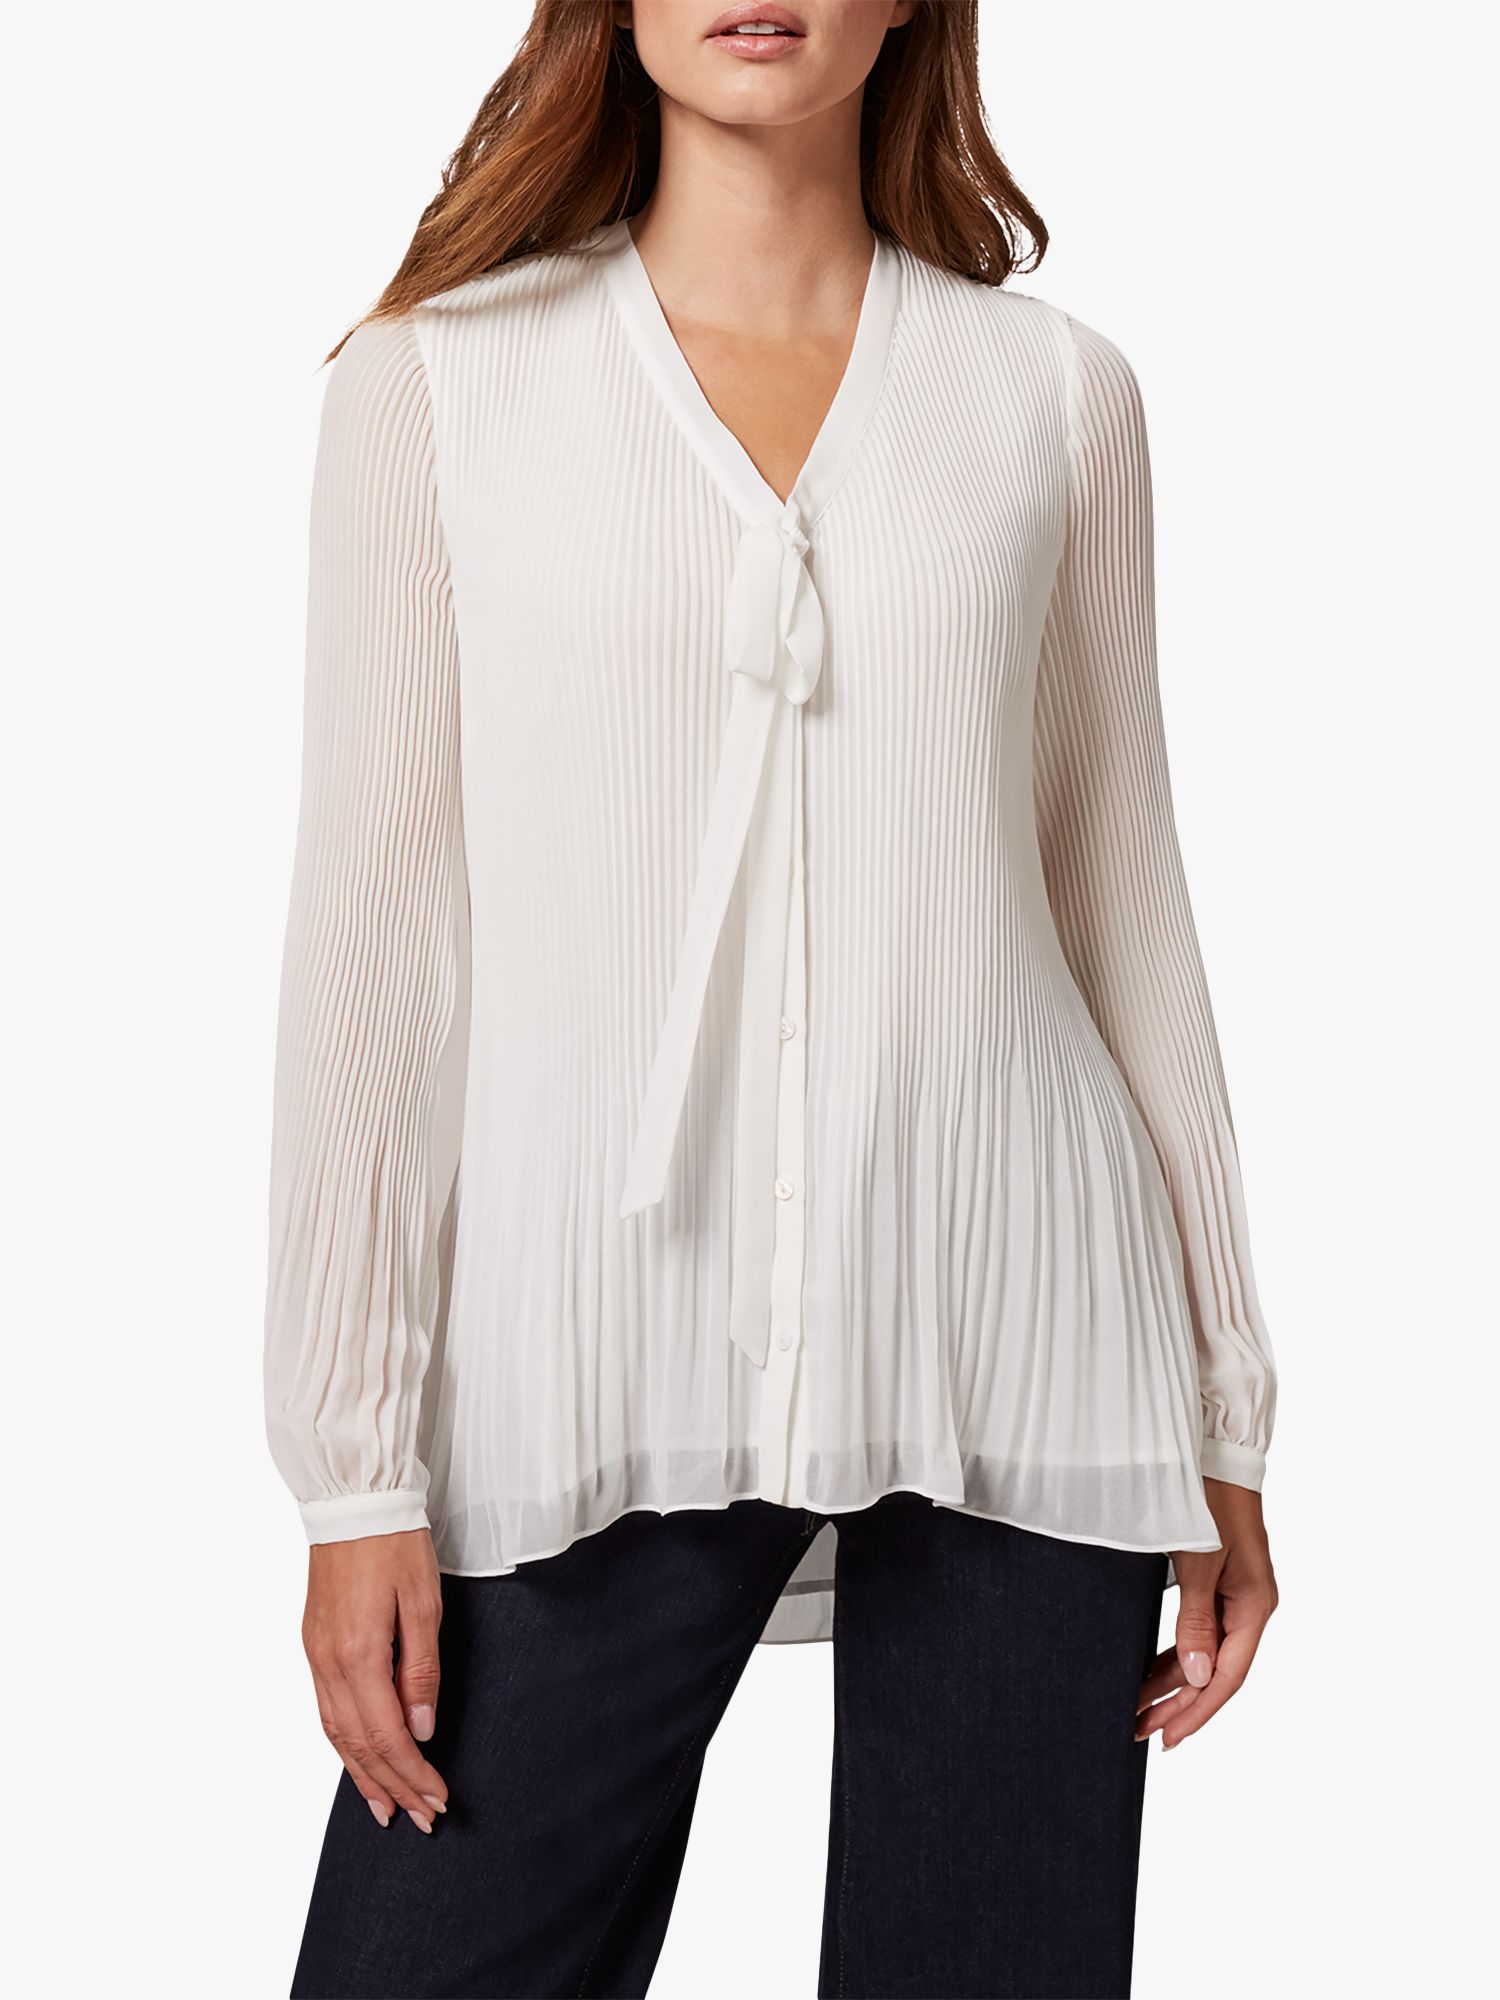 Phase Eight Lily Beth Pleat Tie Neck Blouse, Ivory